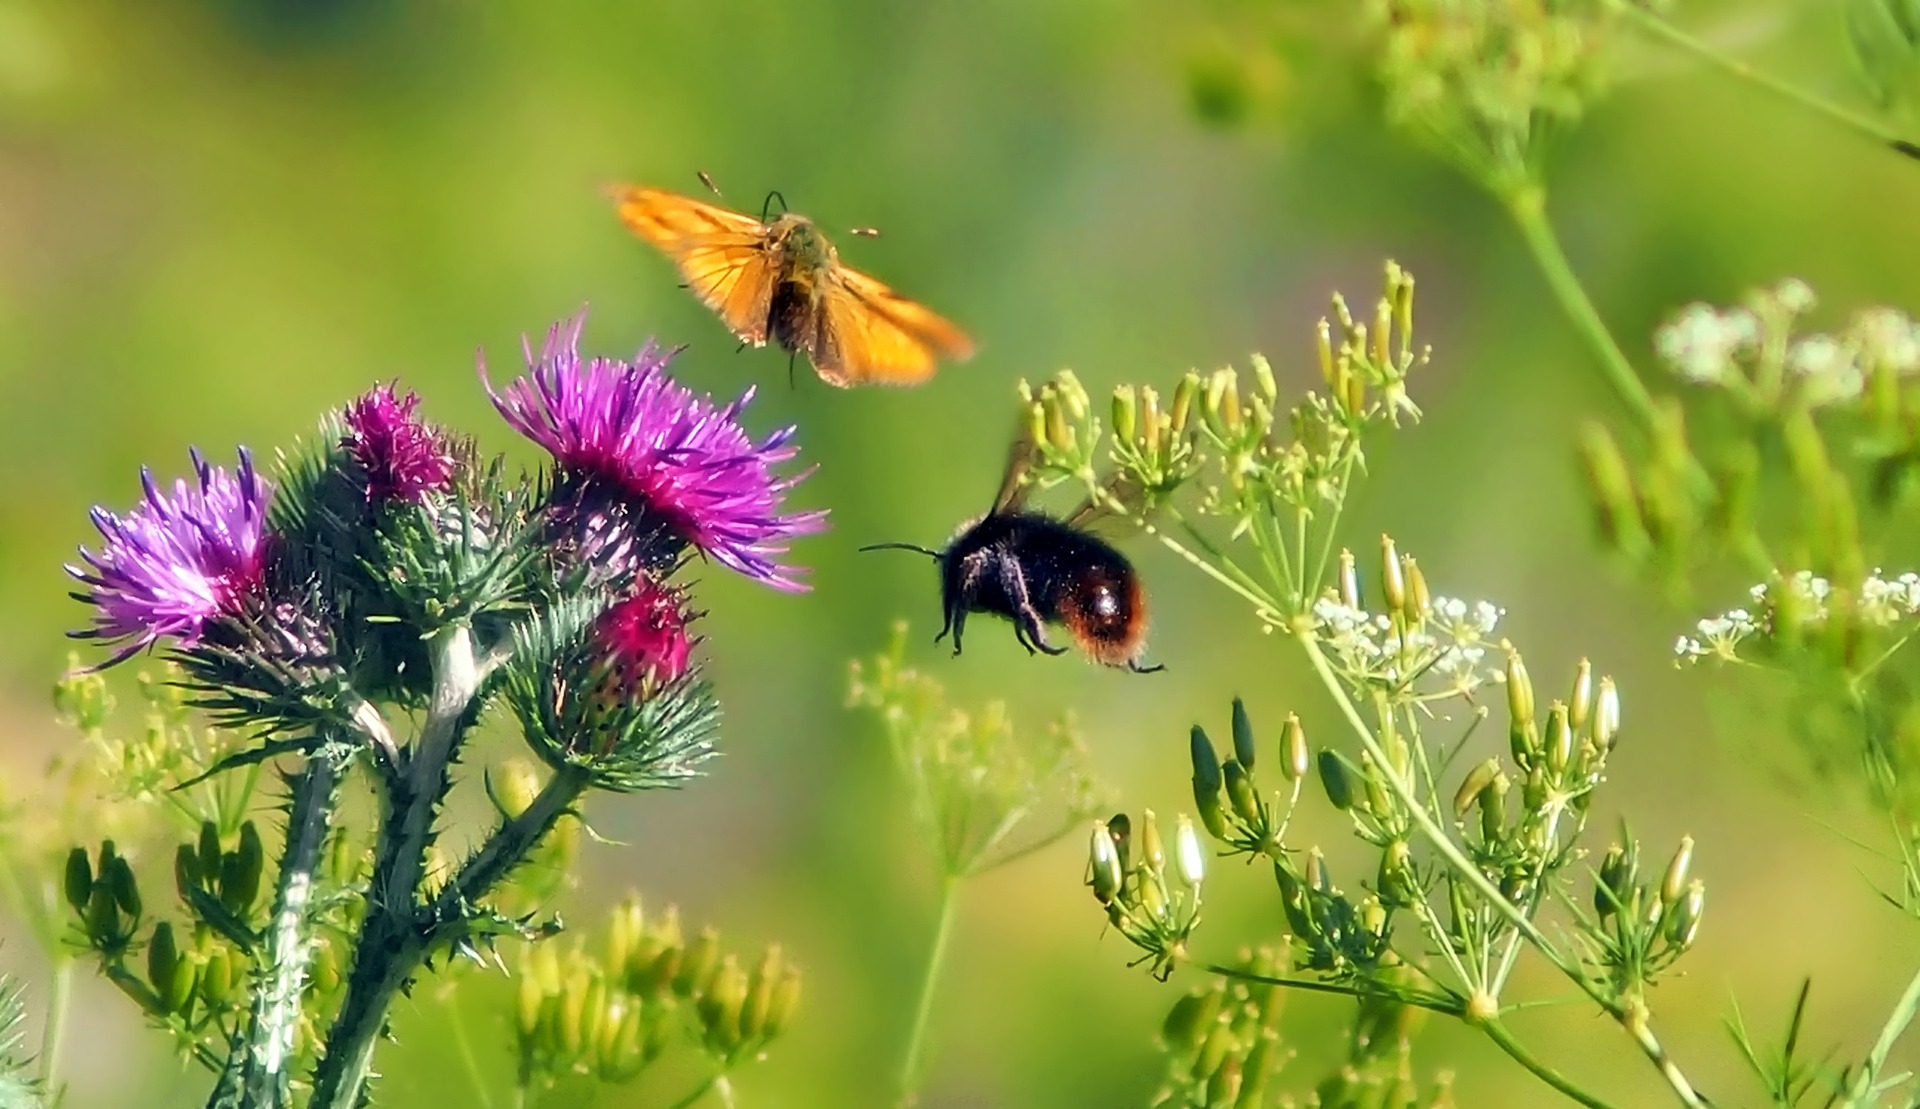 A photograph of a bee and a butterfly buzzing around a thistle